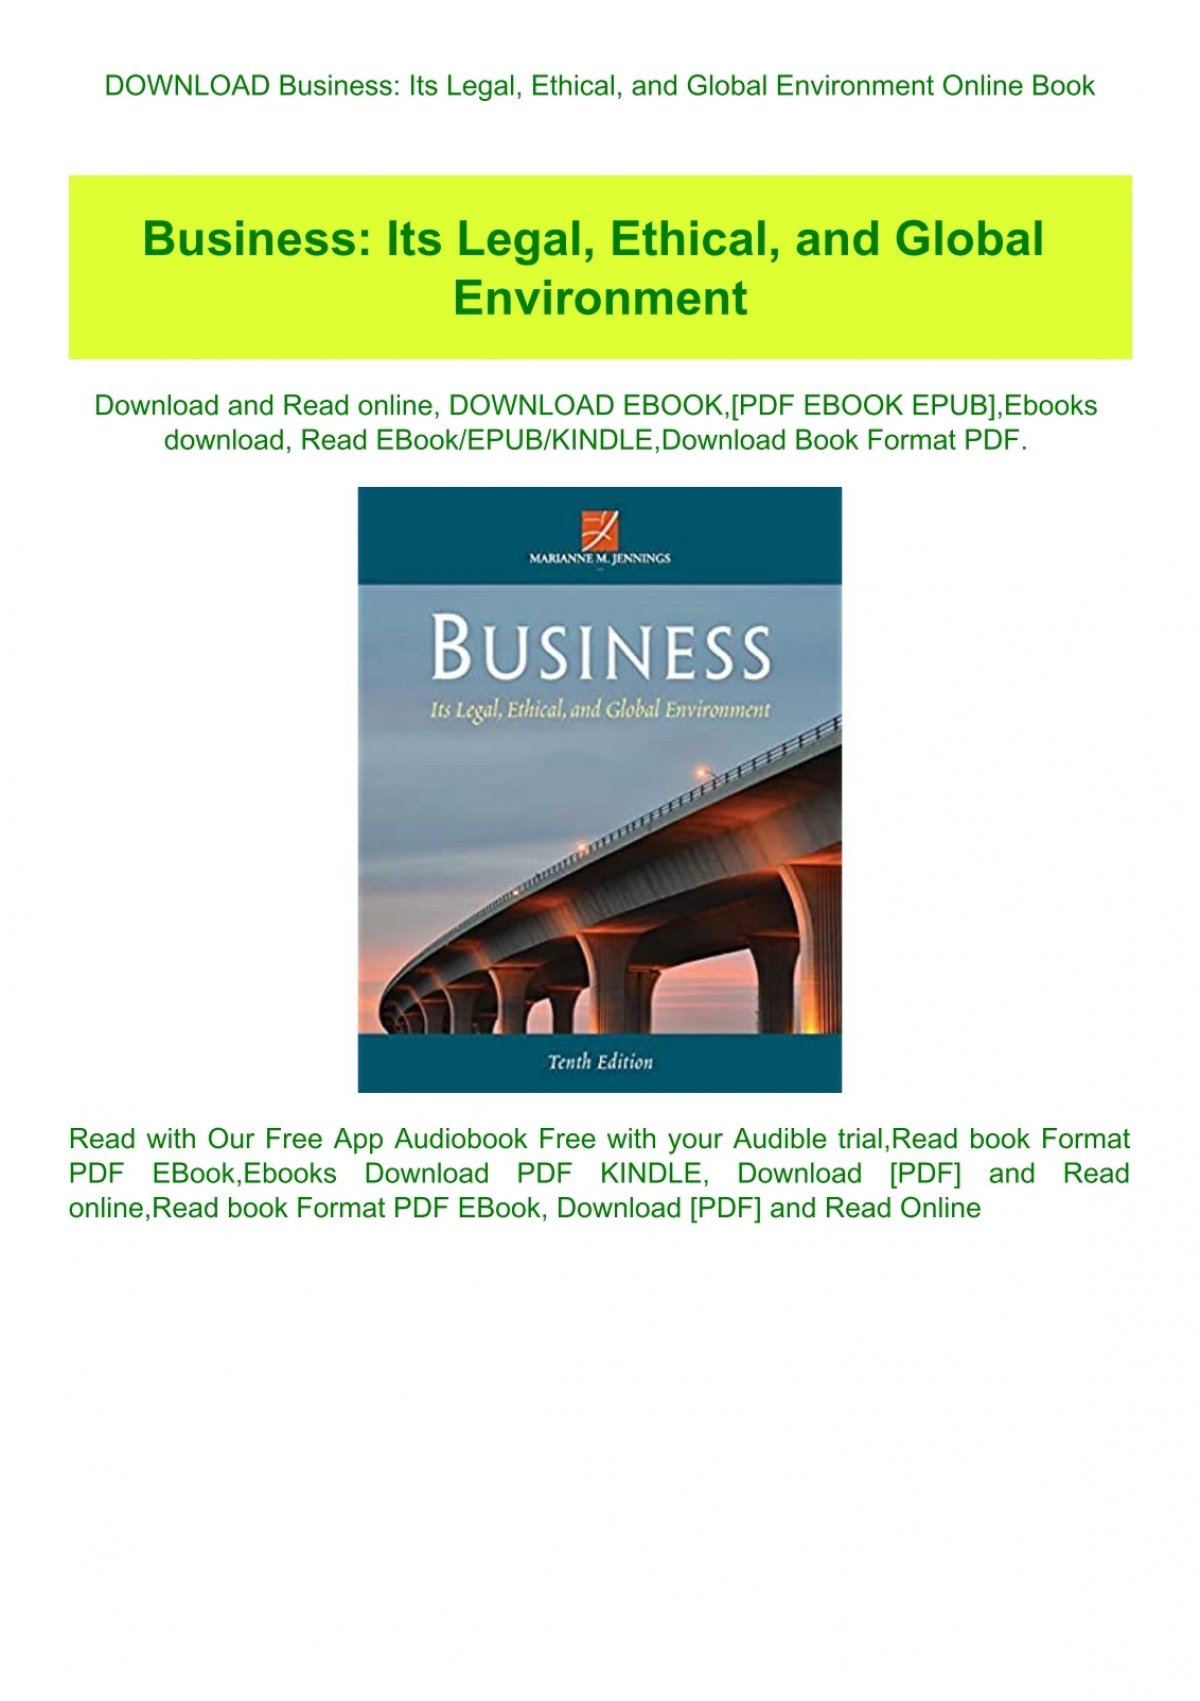 DOWNLOAD Business Its Legal Ethical and Global Environment Online Book